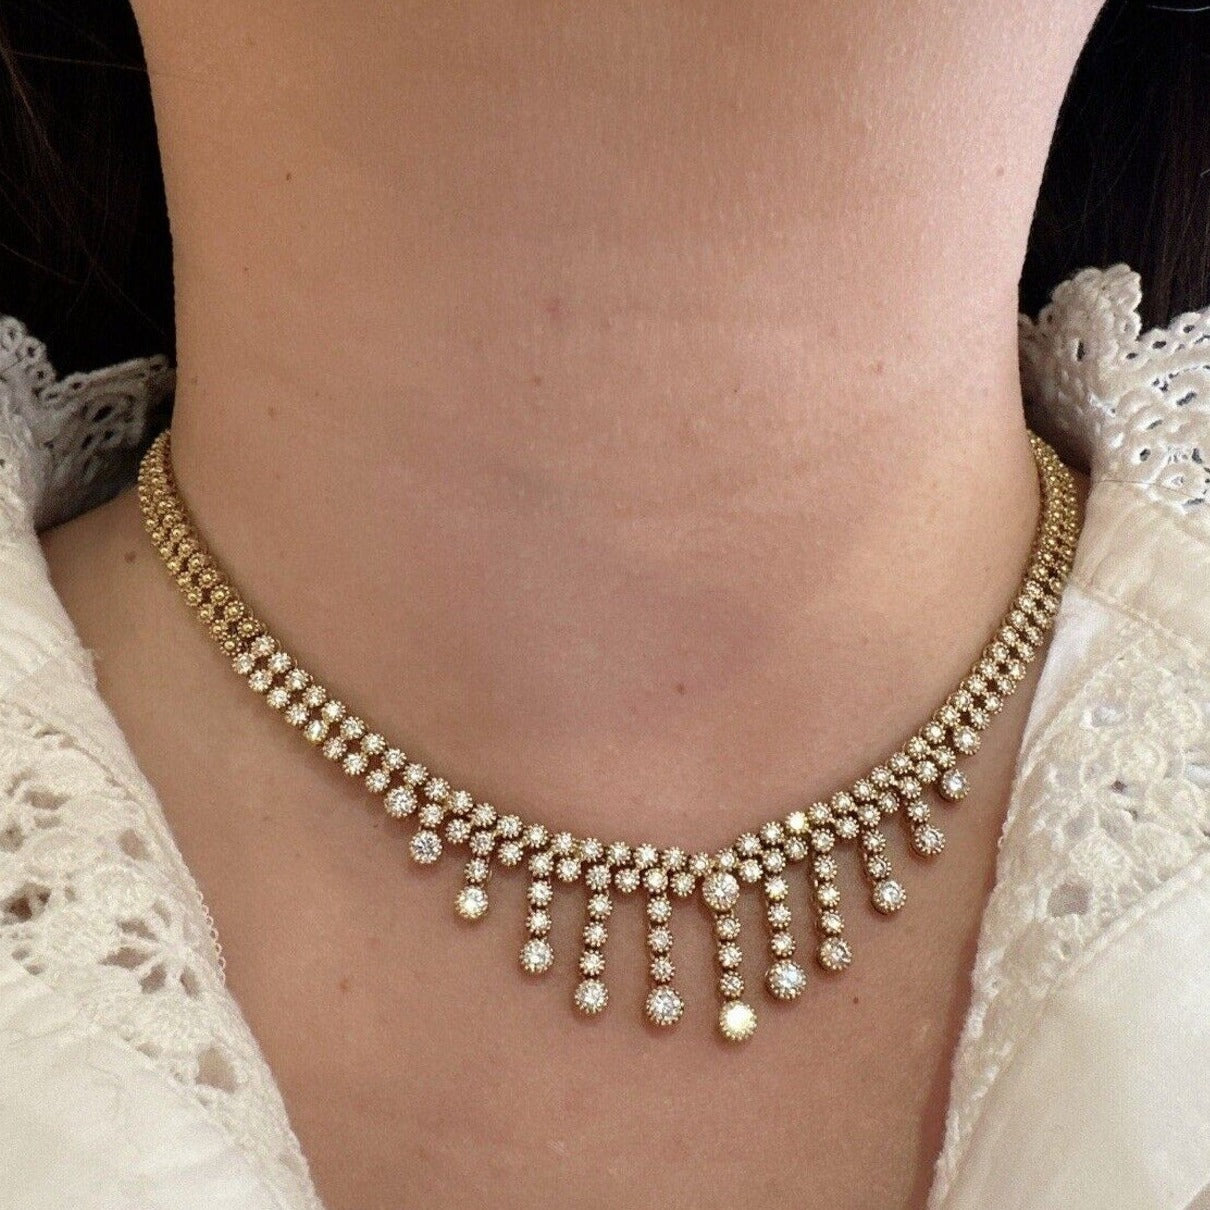 Diamond Choker Necklace with Diamond Dangles in 18k Yellow Gold